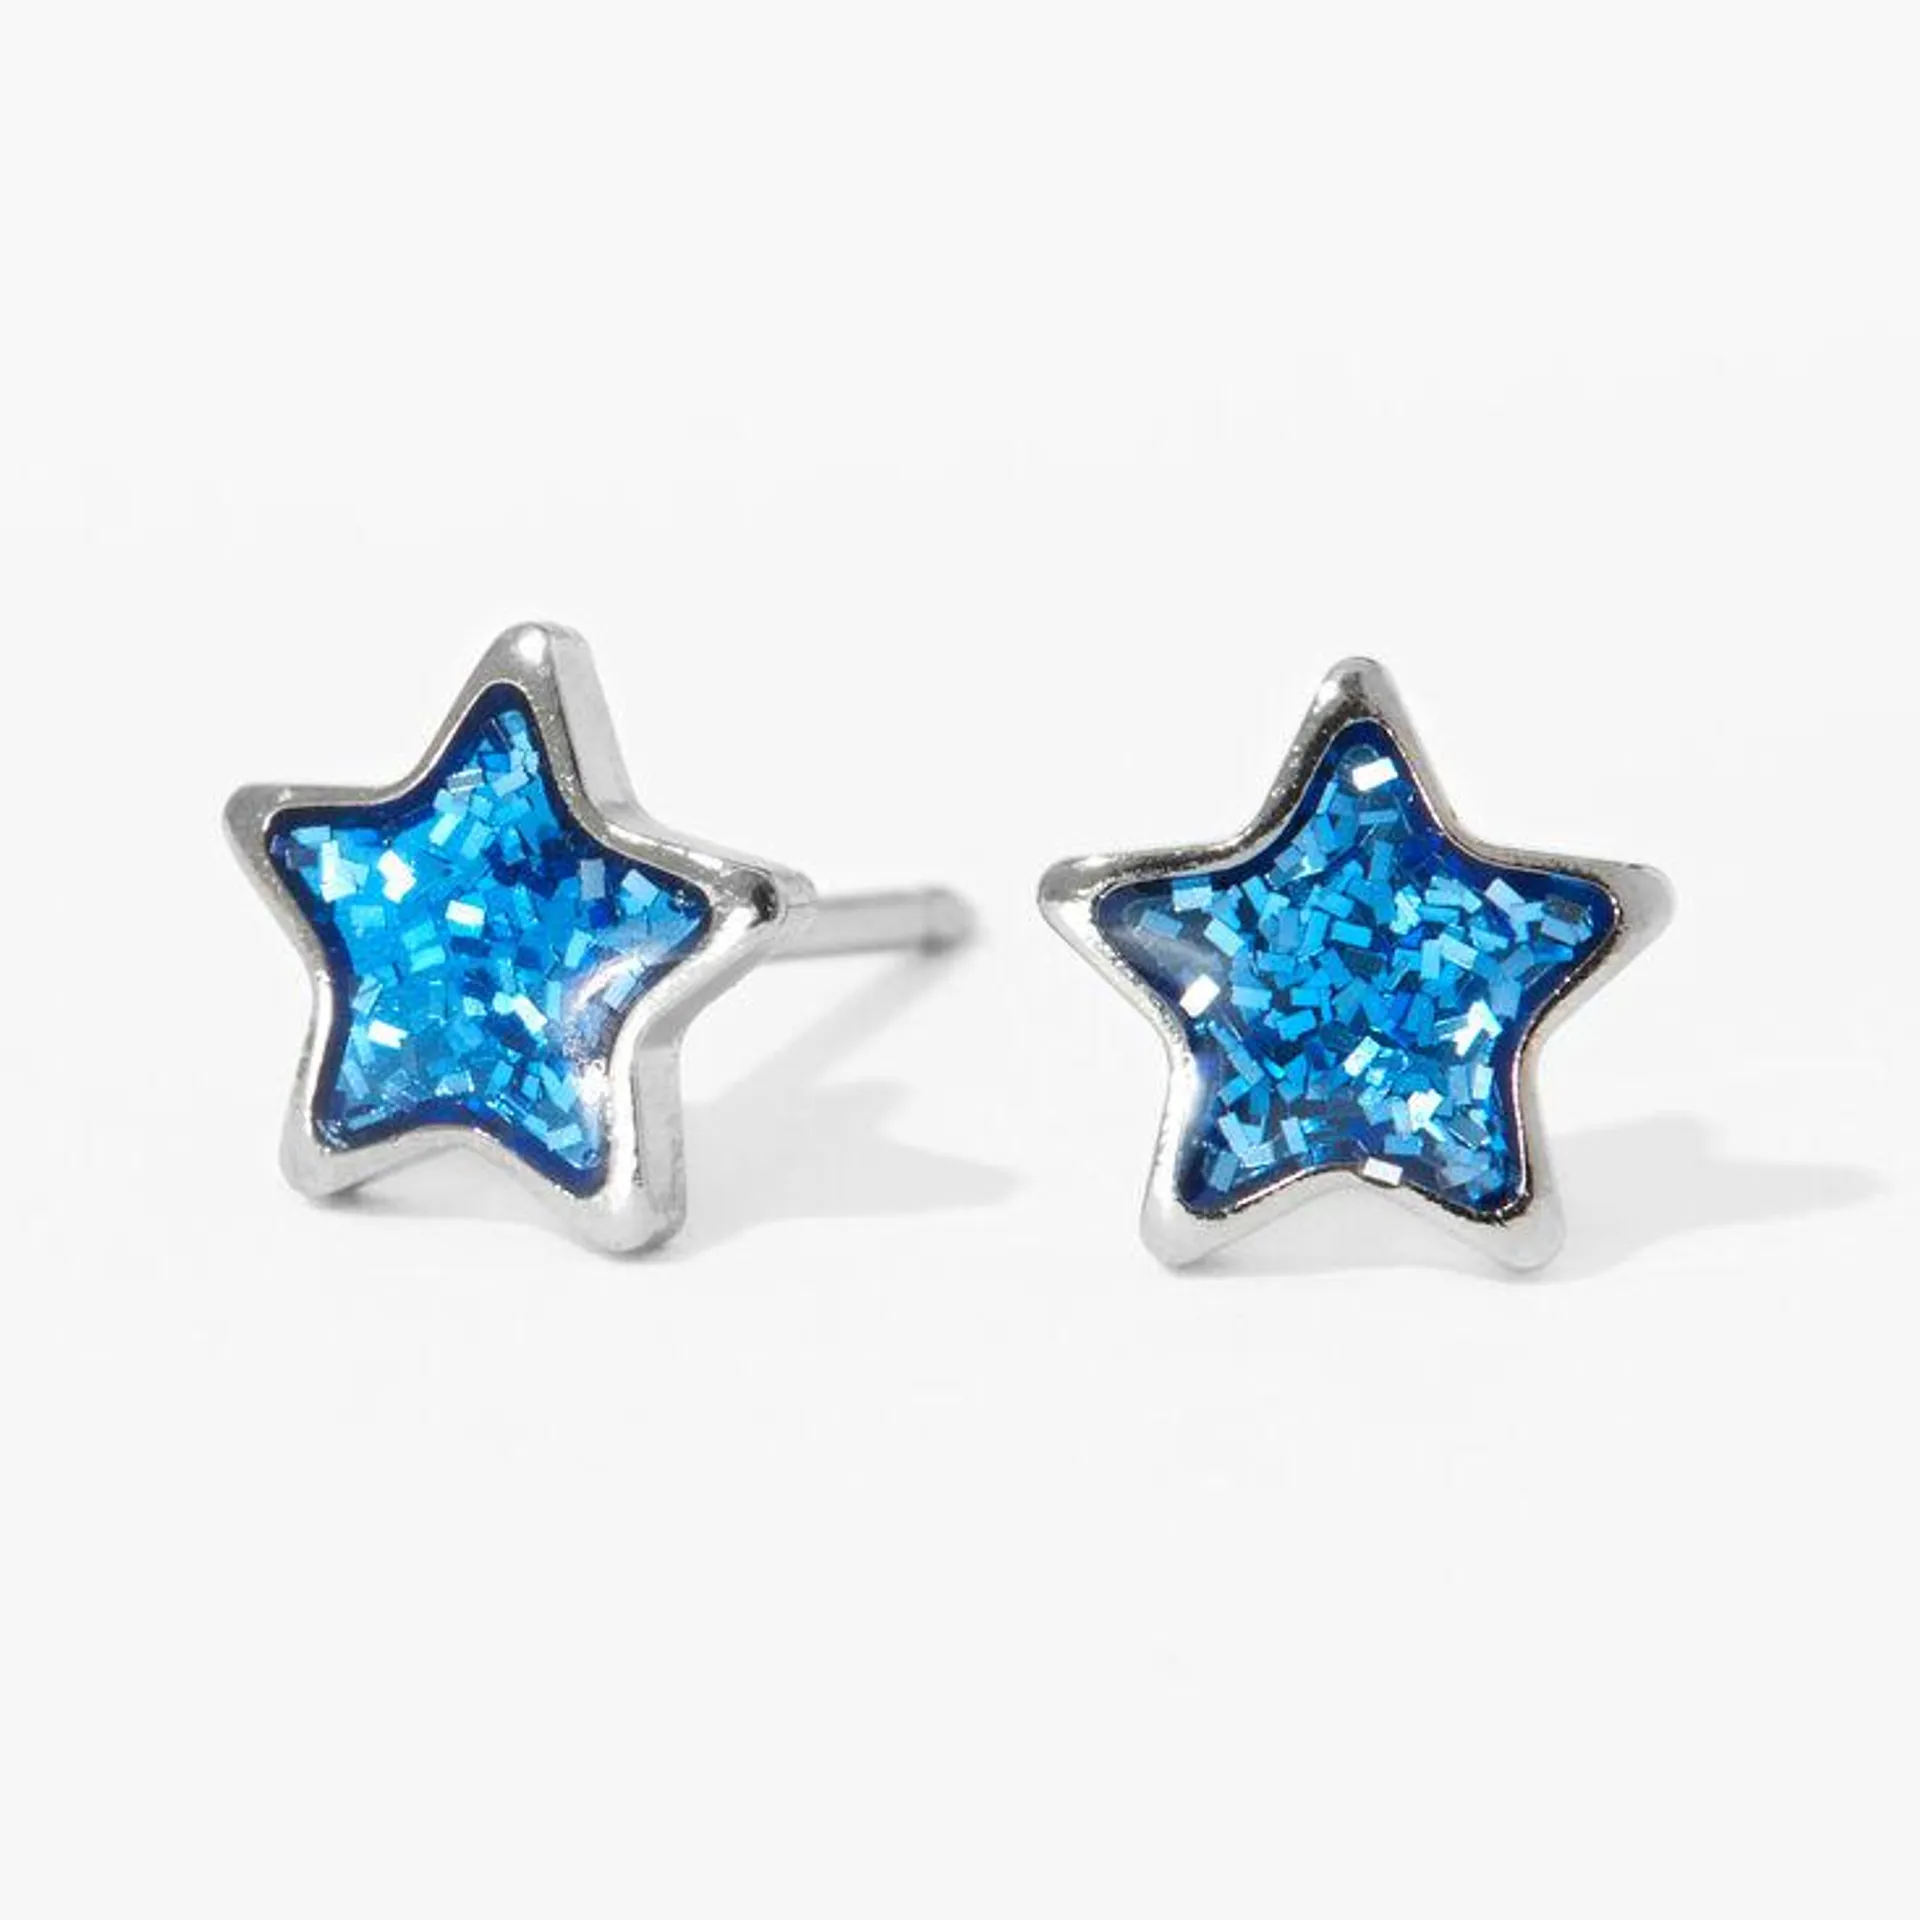 Claire's Exclusive Make A Wish Blue Glitter Stars with Stainless Steel Posts Ear Piercing Kit with Ear Care Solution